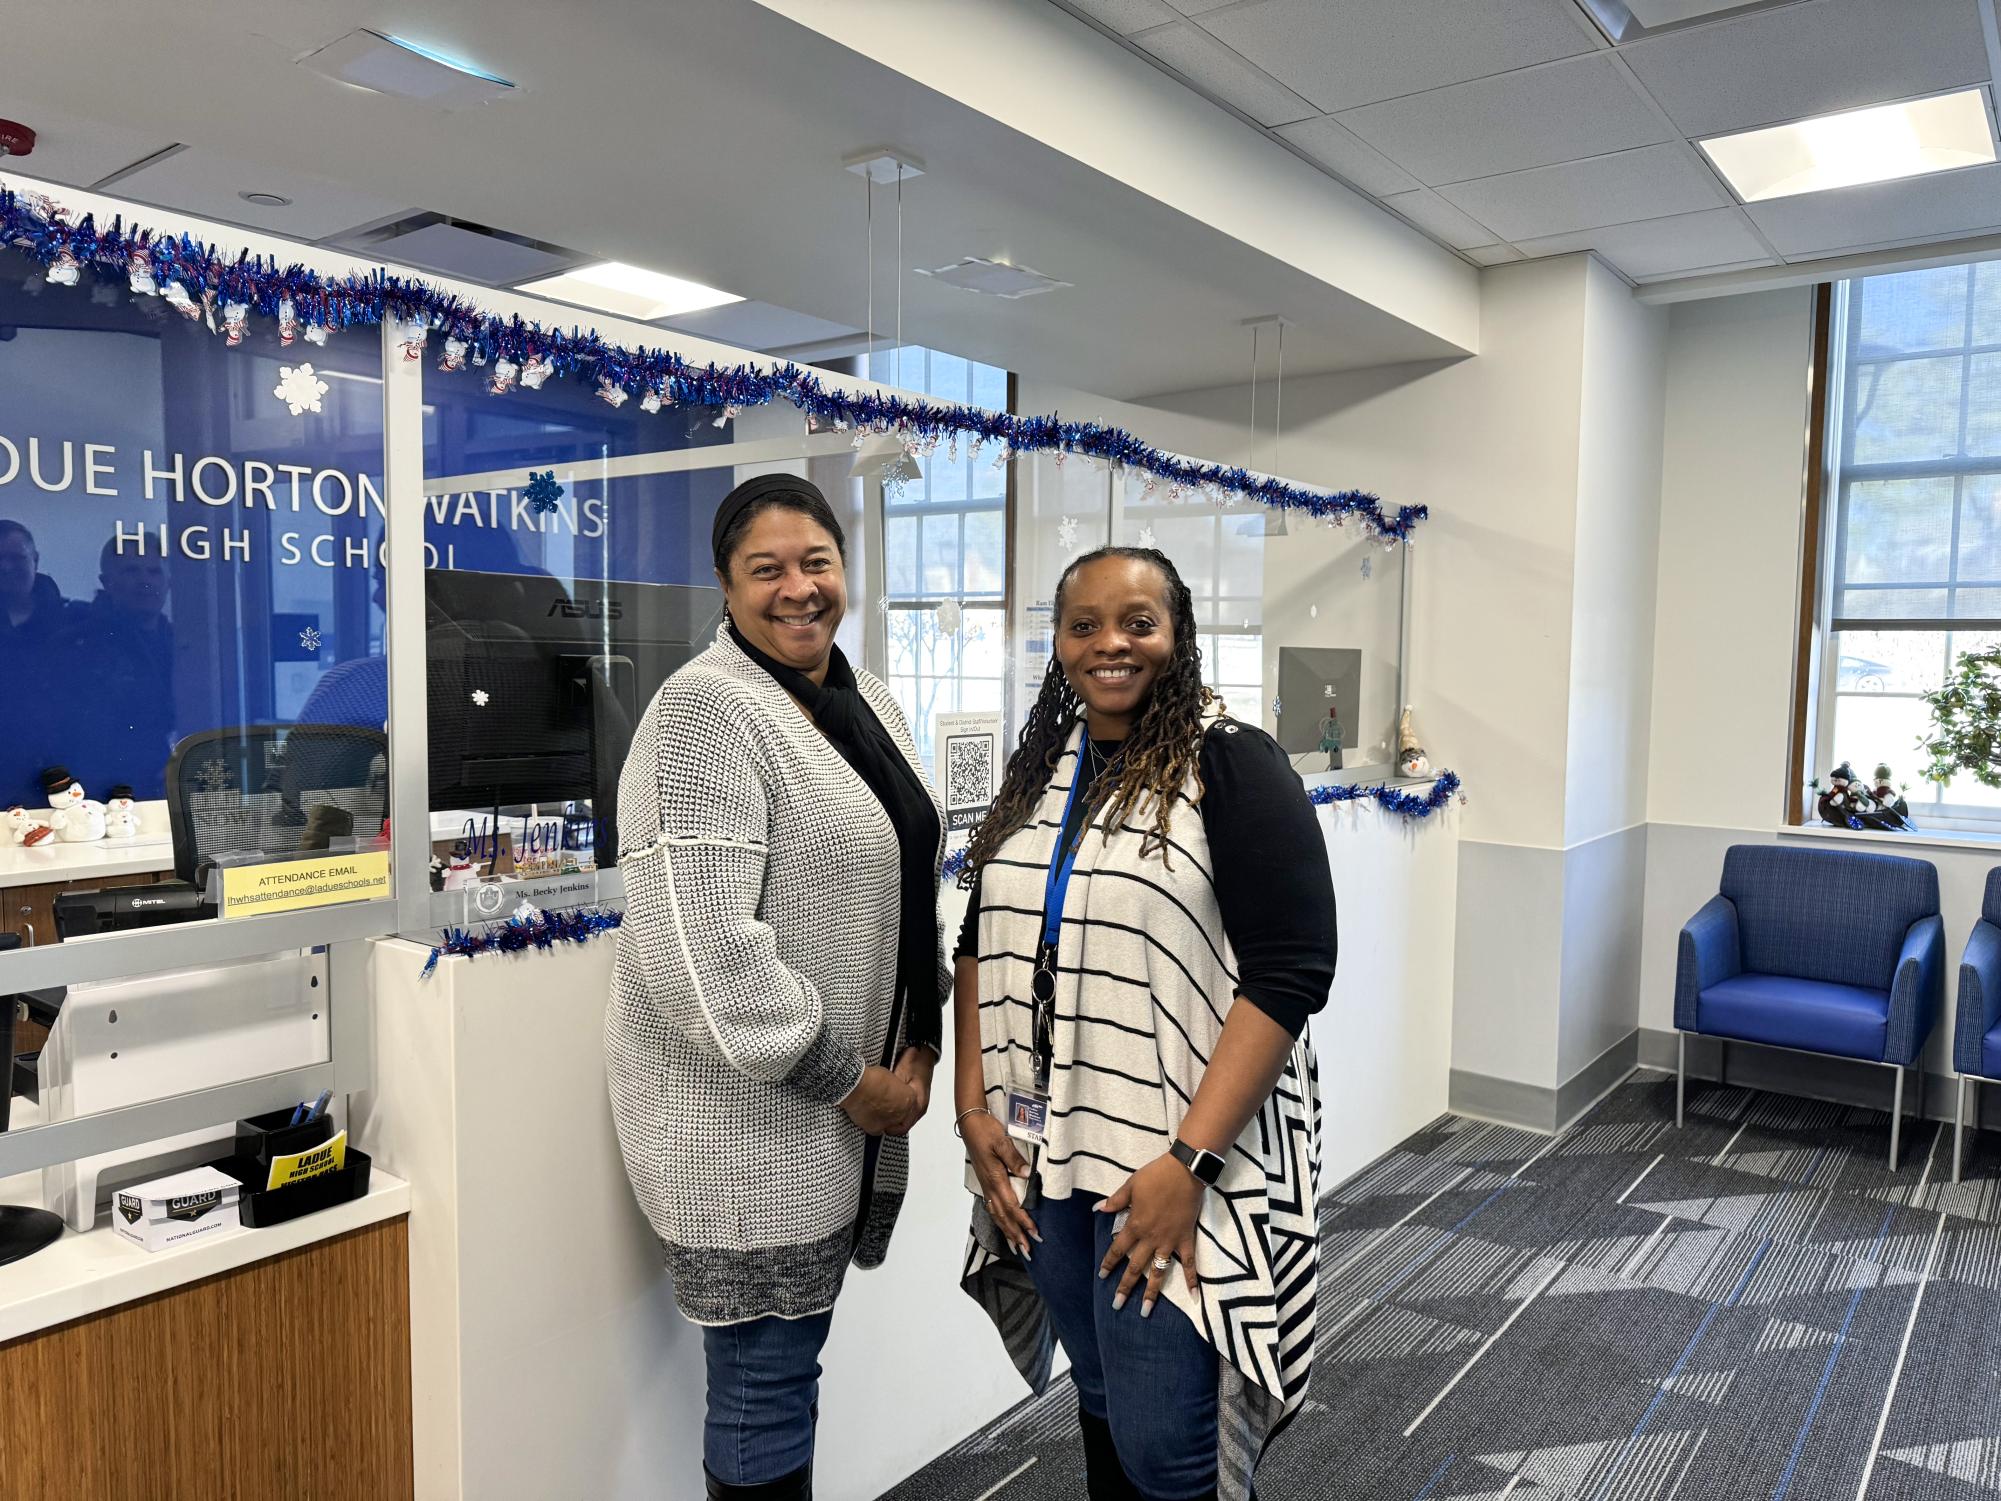 Becky Jenkins and Artina Clark-Lloyd end their day in the Ladue High School front office. Jenkins has been working there for 16 years, and Clark-Lloyd for three years. “[I wanted to work here for] a different environment,” Clark-Lloyd said.  